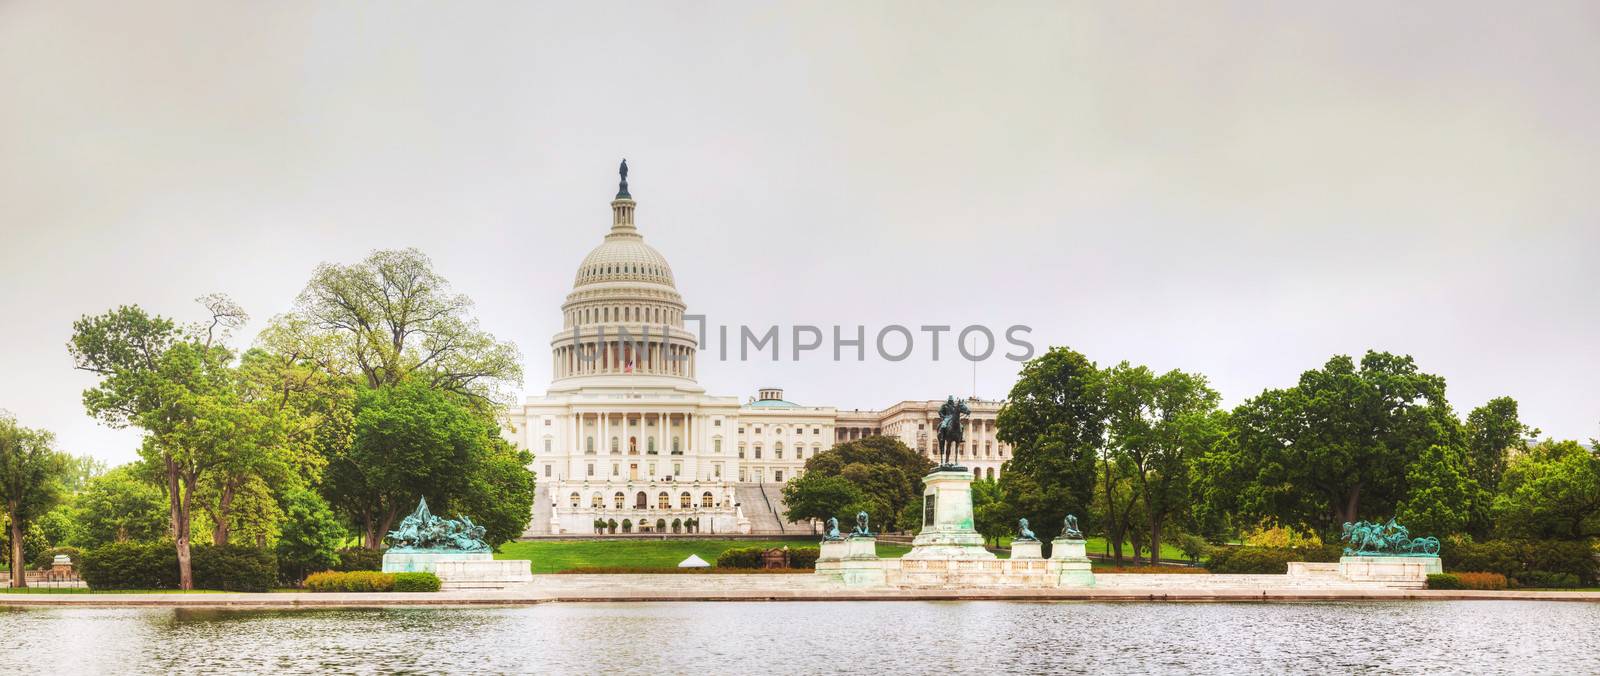 United States Capitol building in Washington, DC by AndreyKr